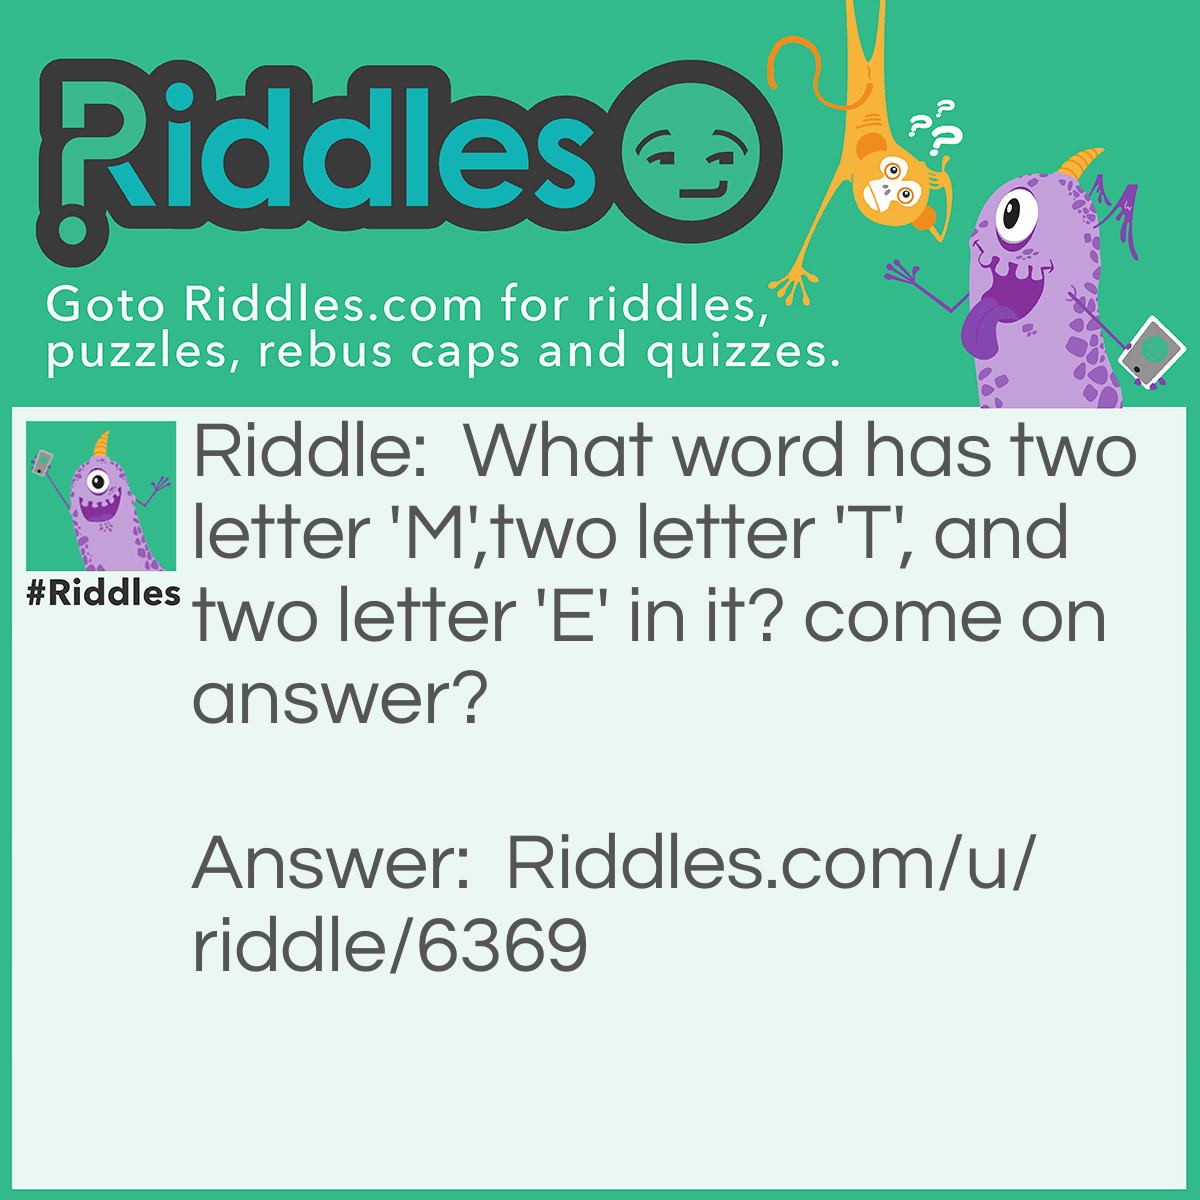 Riddle: What word has two letter 'M',two letter 'T', and two letter 'E' in it? come on answer? Answer: COMMITTEE.